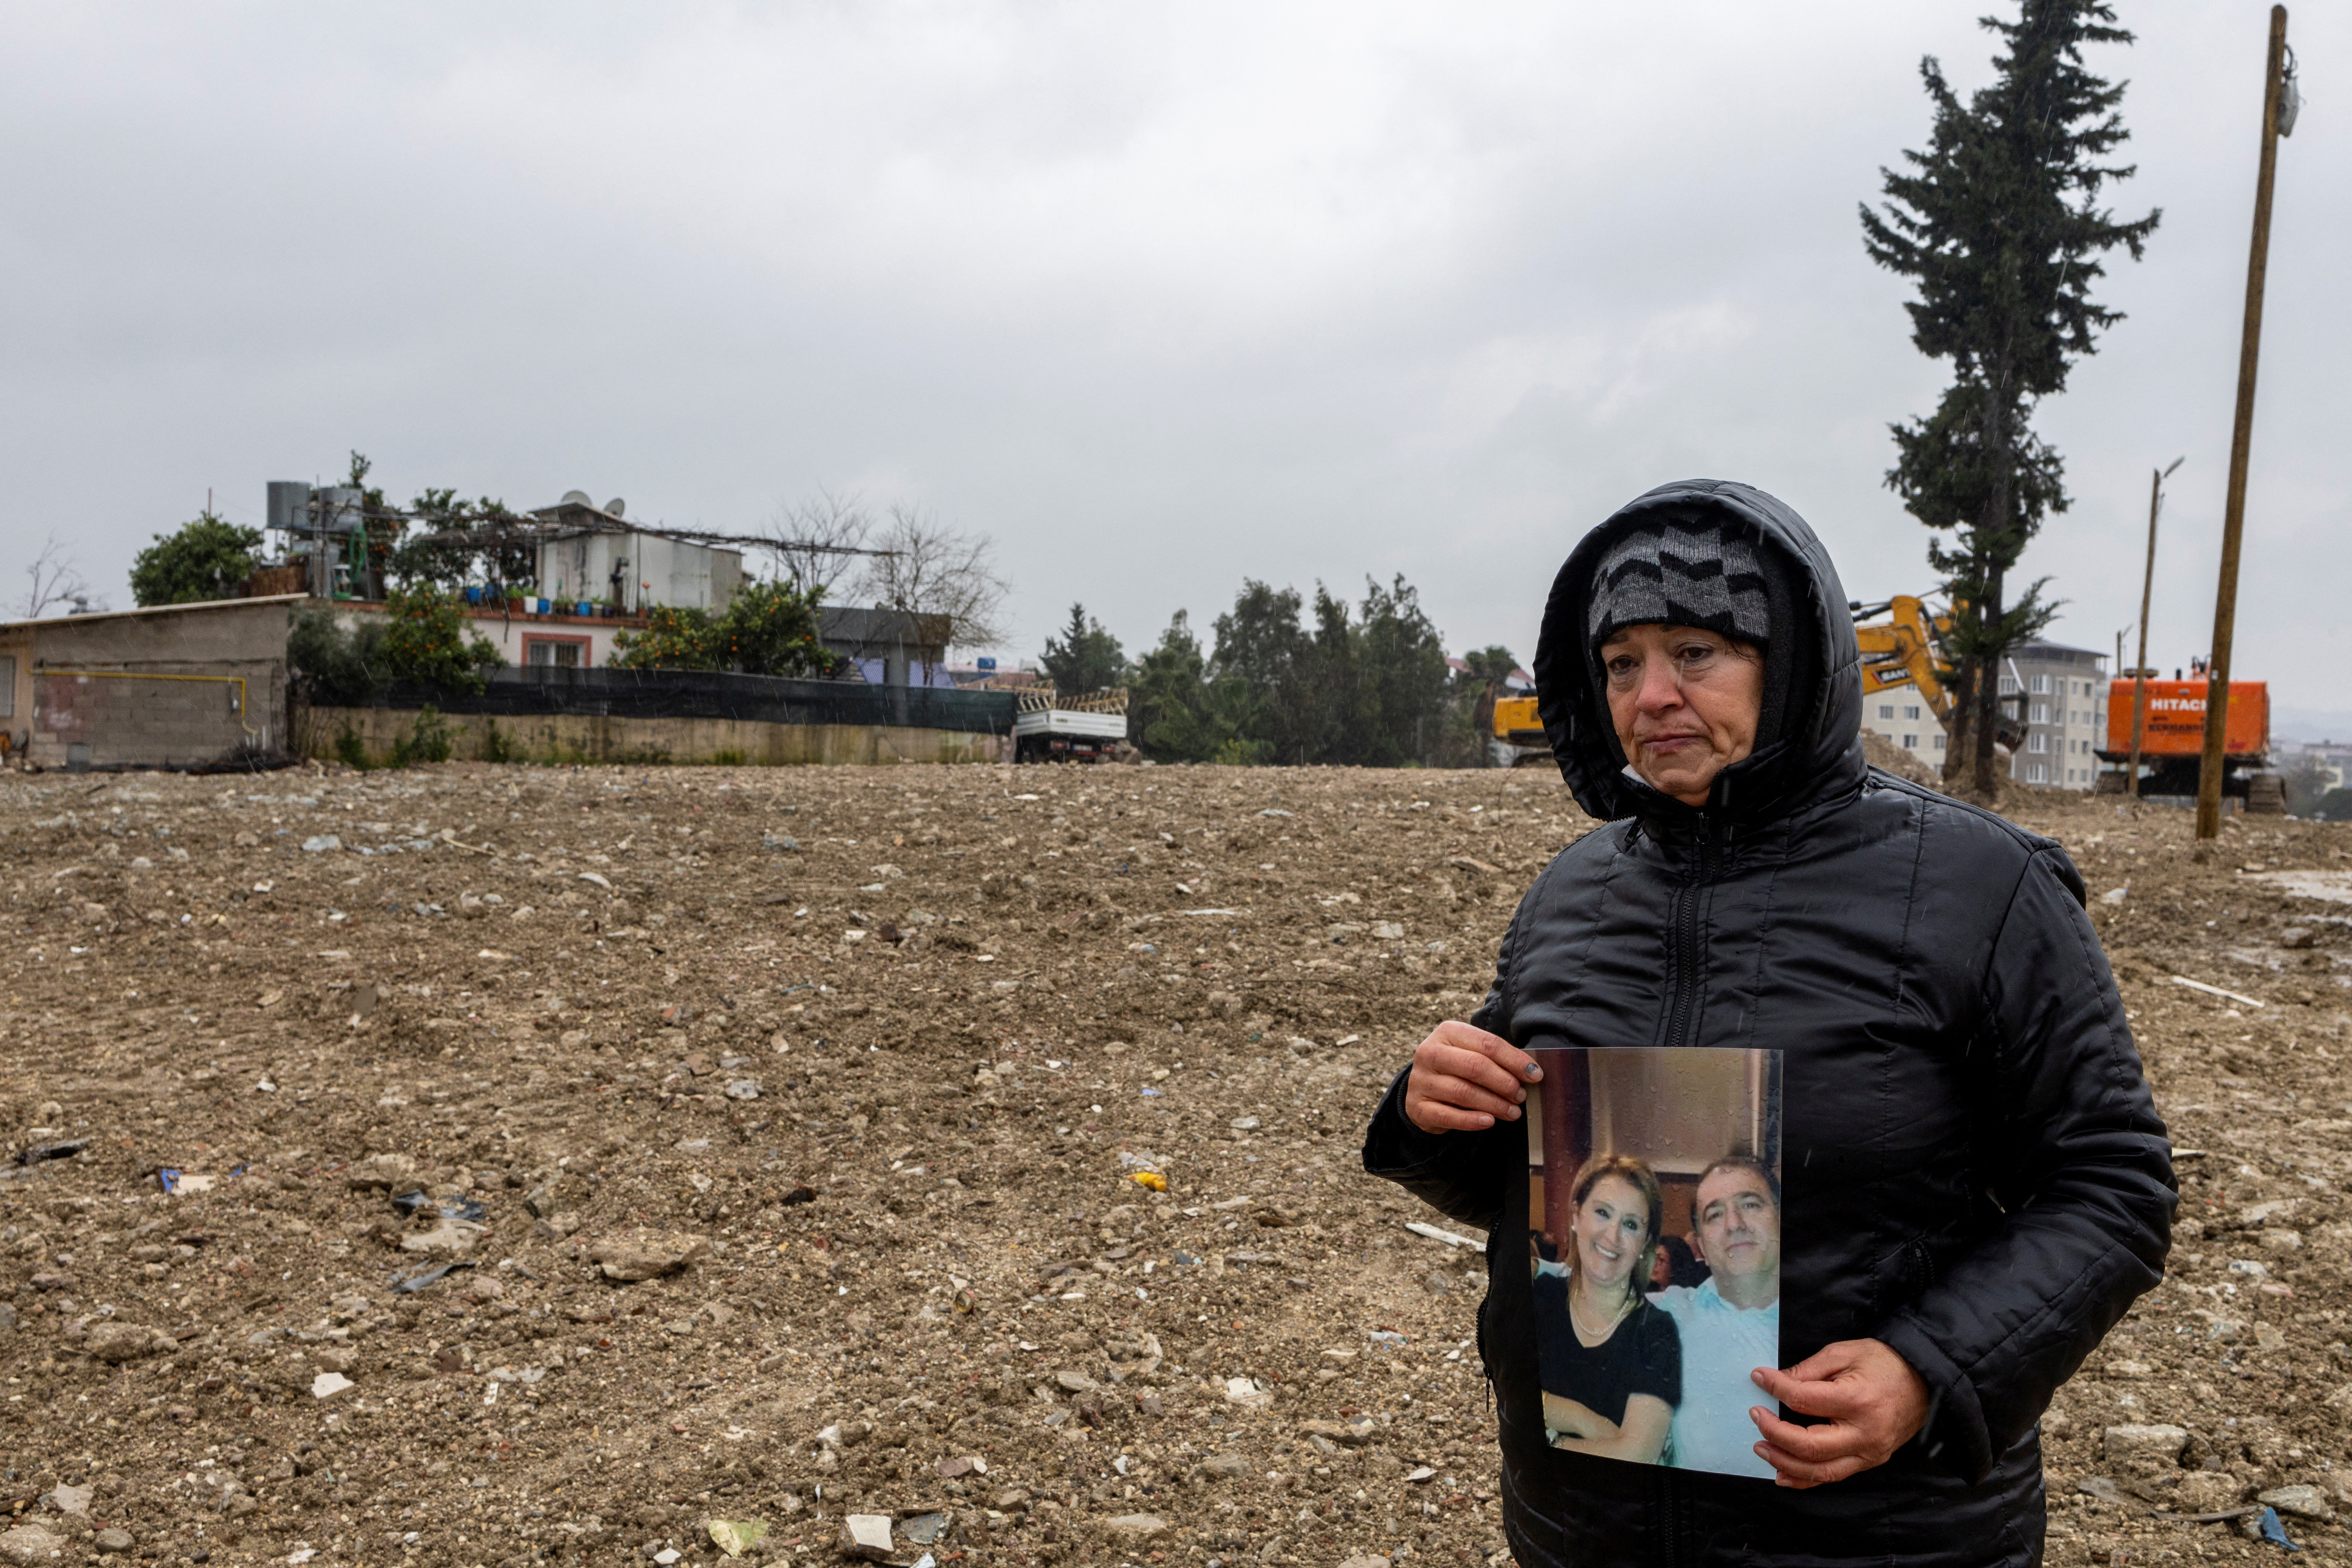 One year on, Turks still seek justice for loved ones missing after earthquake